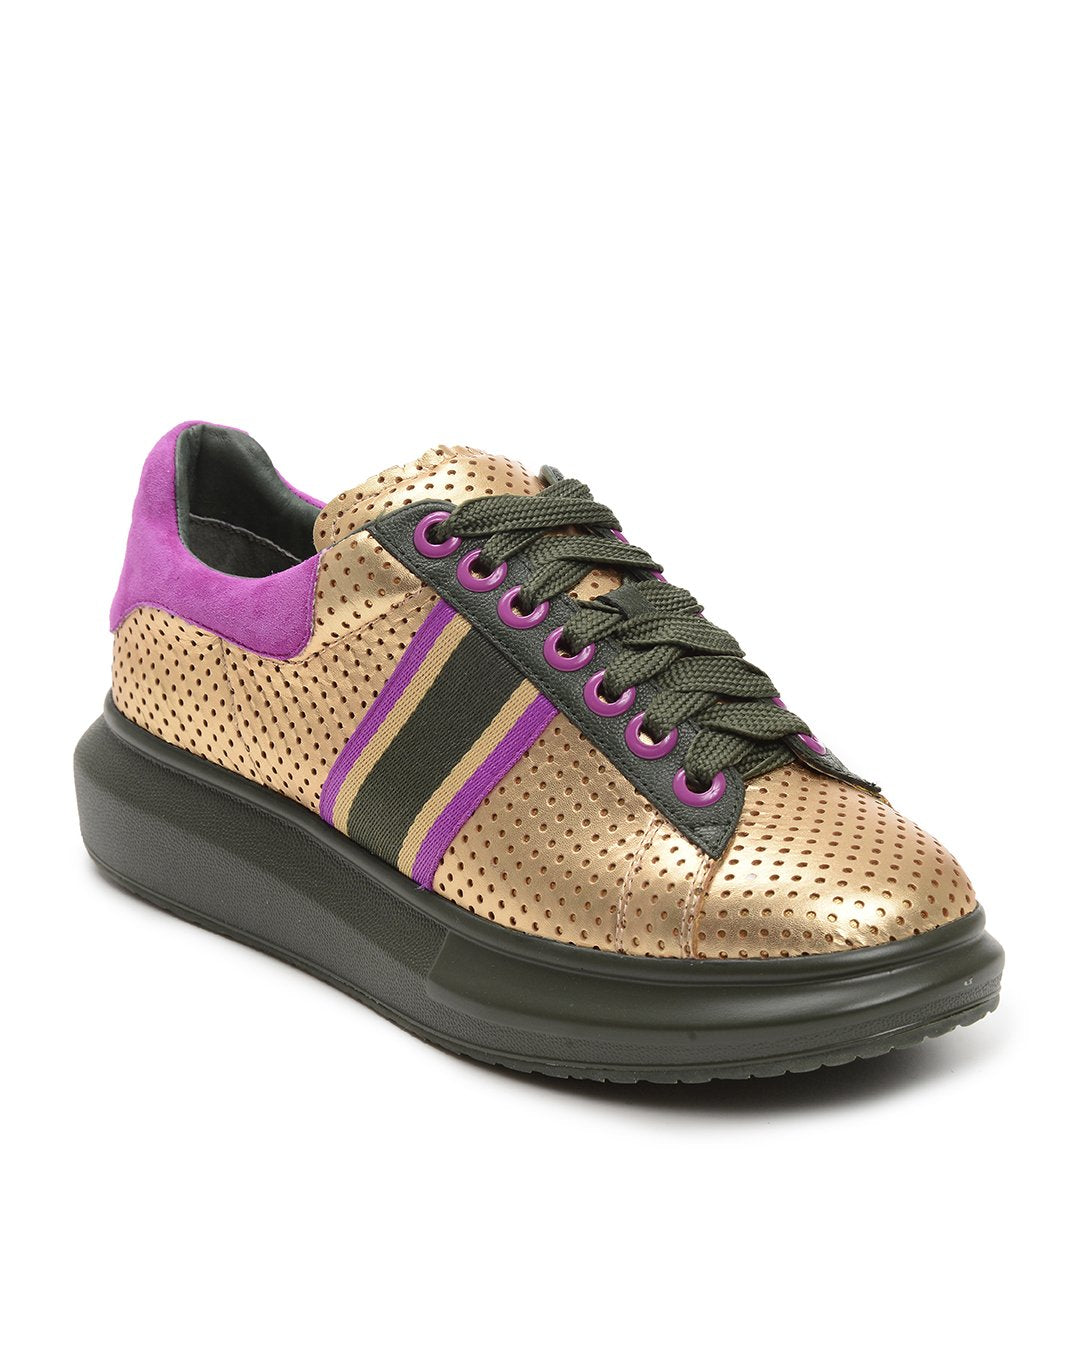 Hollie Watman Spots and Stripes Fashion Sneakers - Gold / Olive